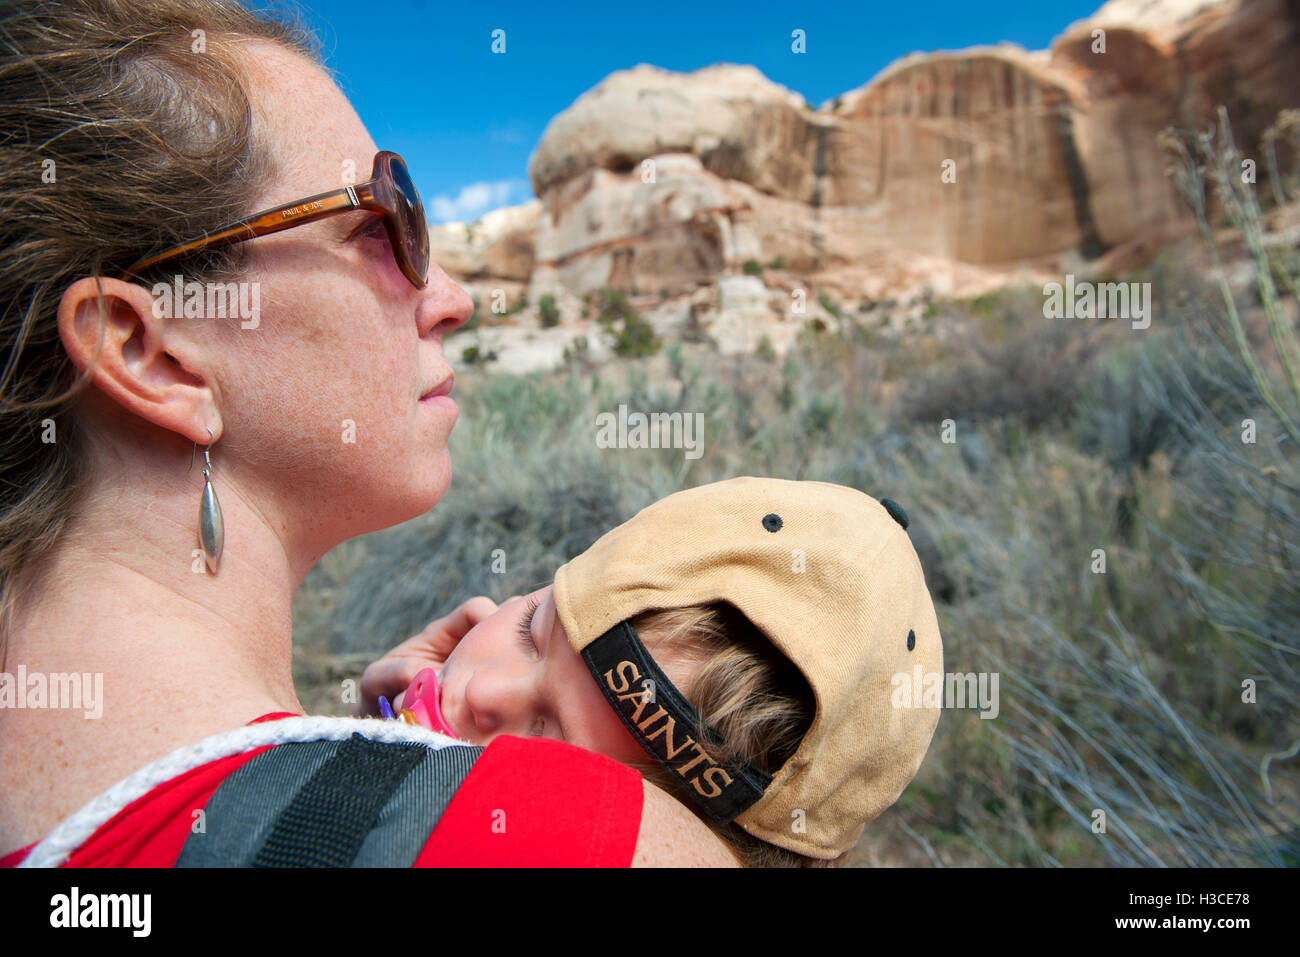 Mother hiking in nature, carrying sleeping son Stock Photo